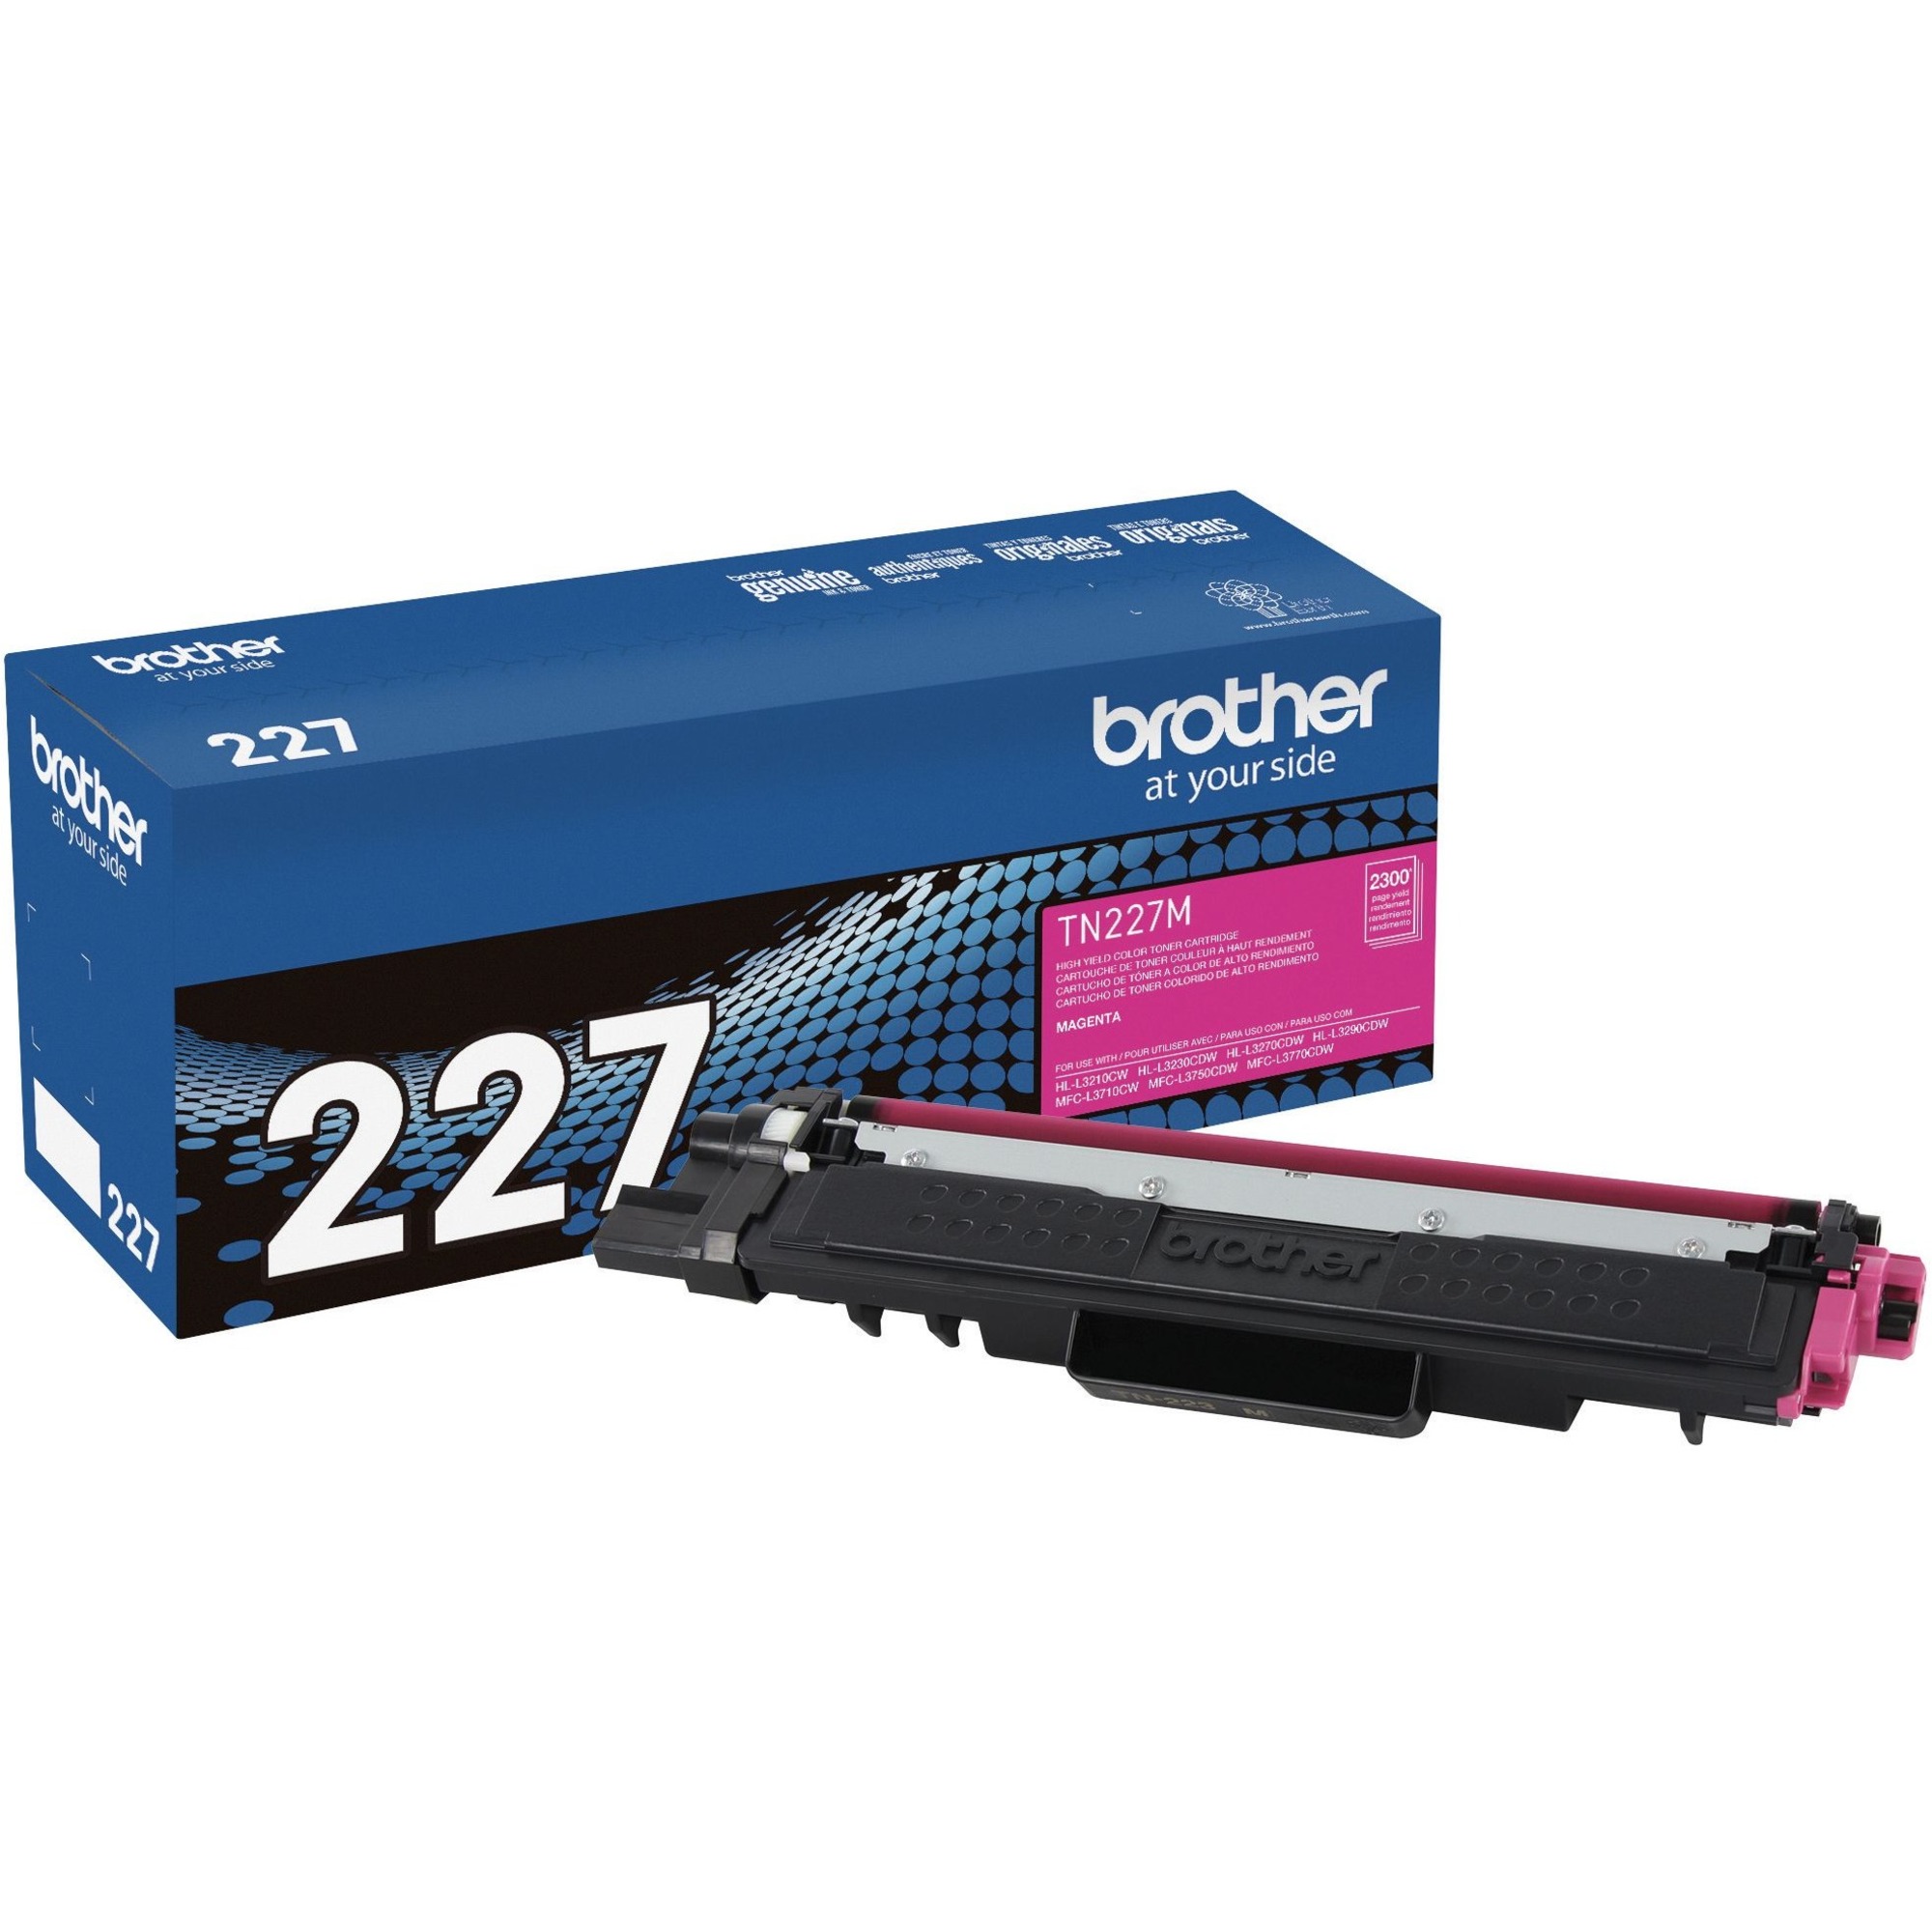 Genuine TN-227M High Yield Magenta Toner Cartridge 2300 Pages - Supplies/Toner | Brother Industries, Ltd | Reidsville's Office City